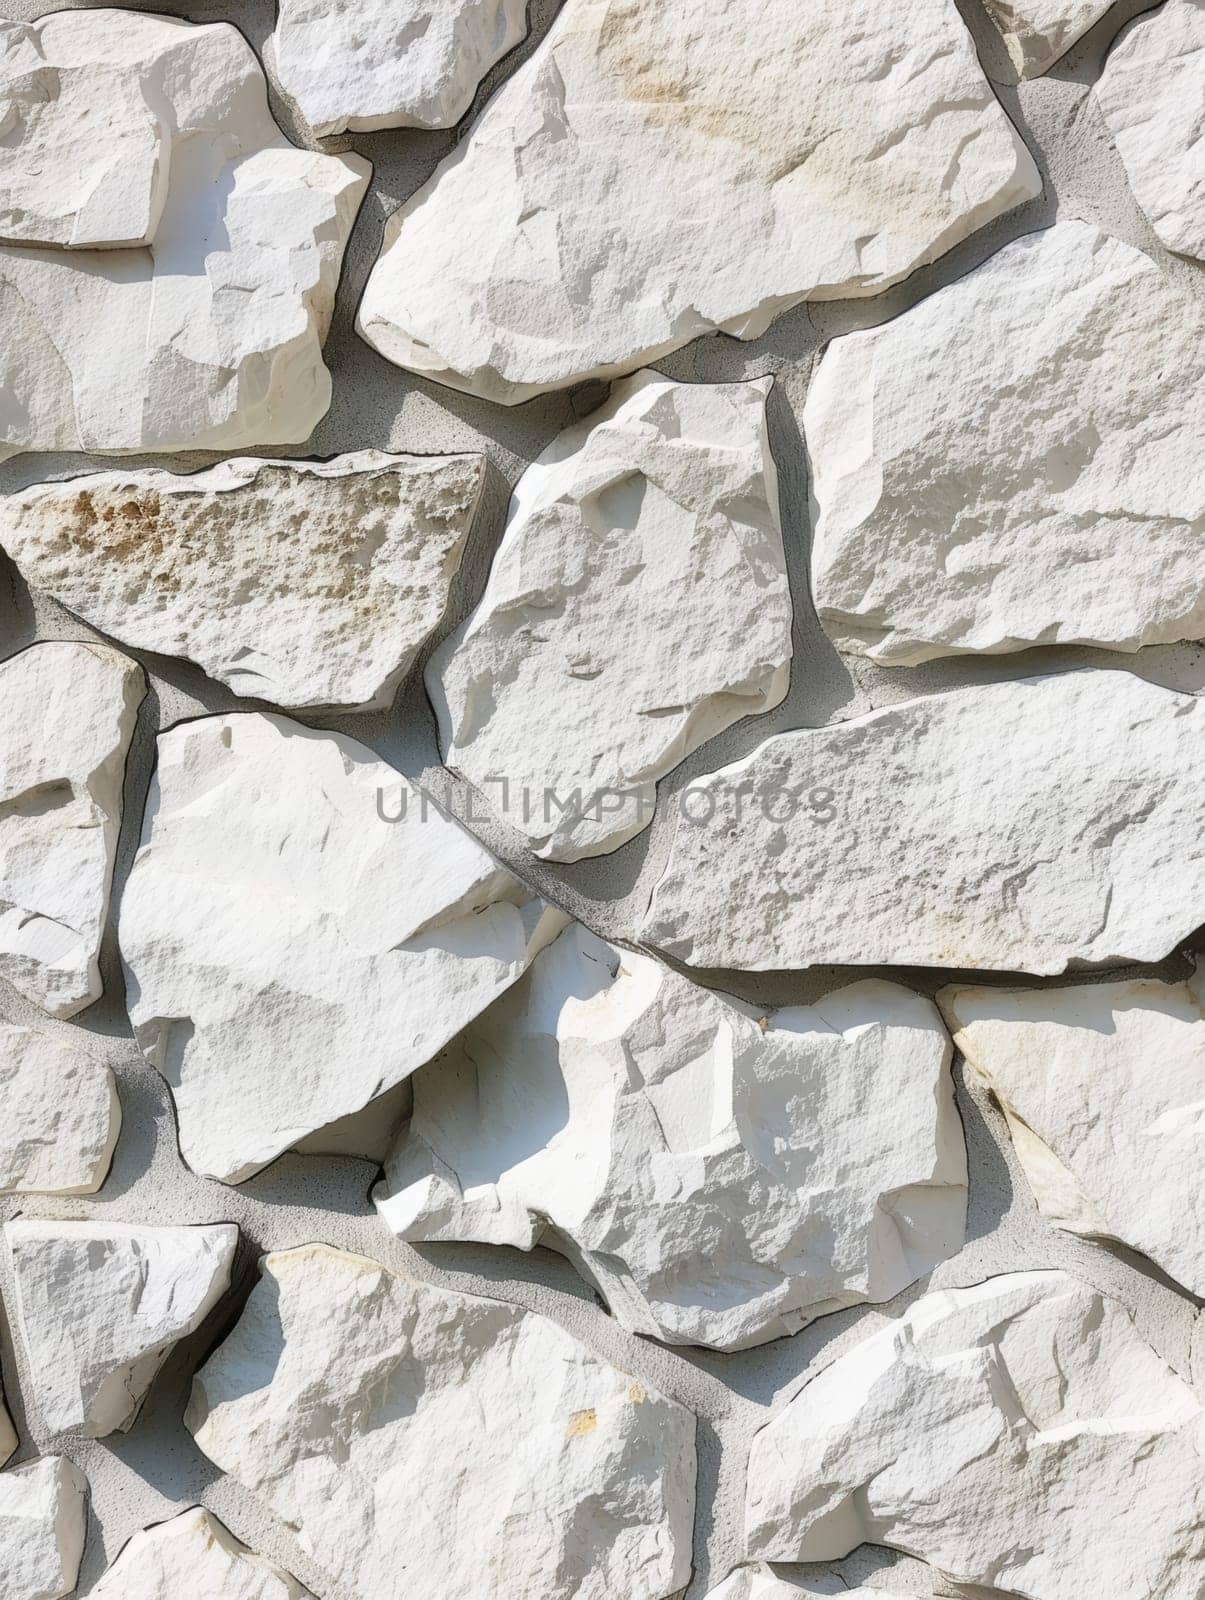 Detailed image of a white stone surface with natural cracks and a textured finish